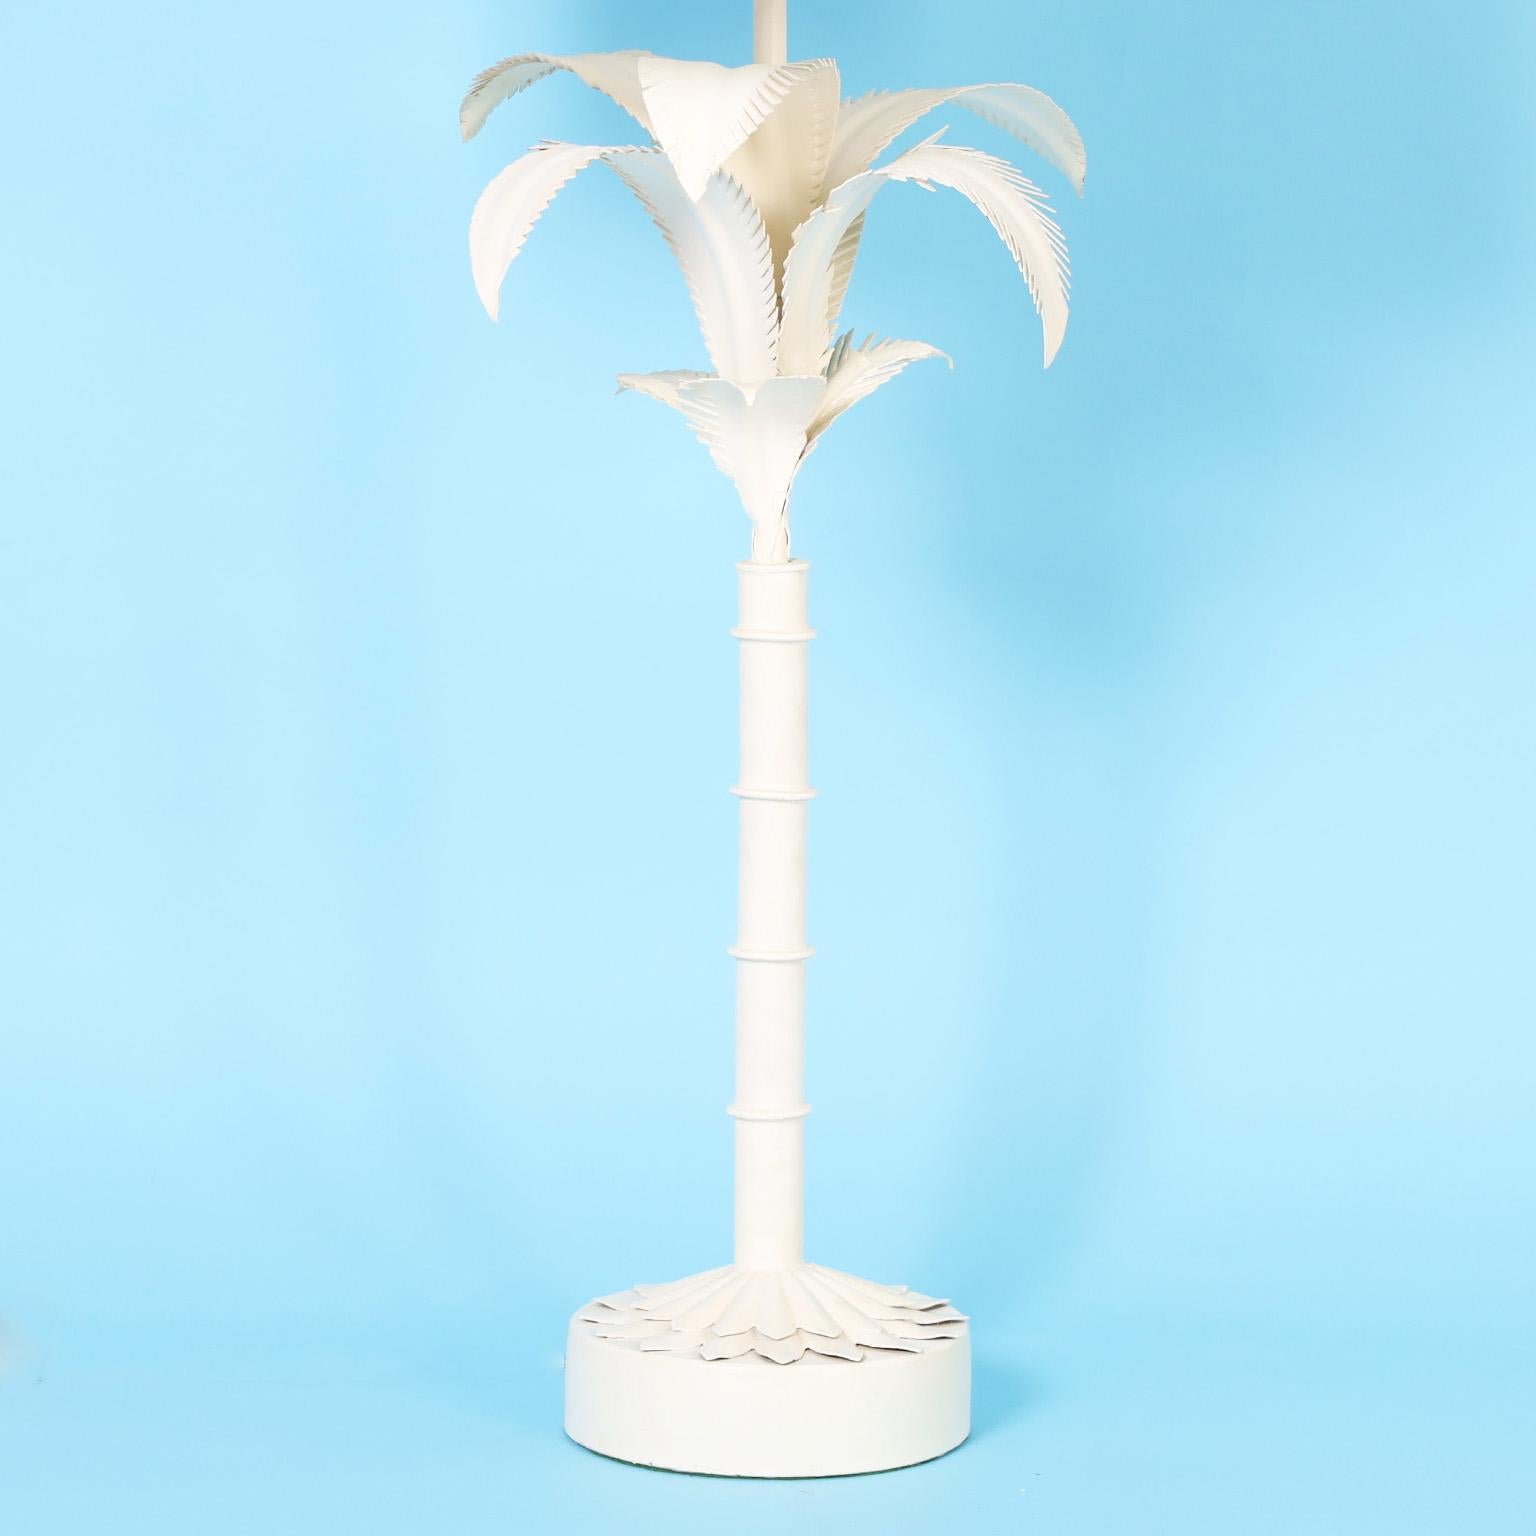 Pair of White Tole Italian Palm Tree Table Lamps In Good Condition For Sale In Palm Beach, FL